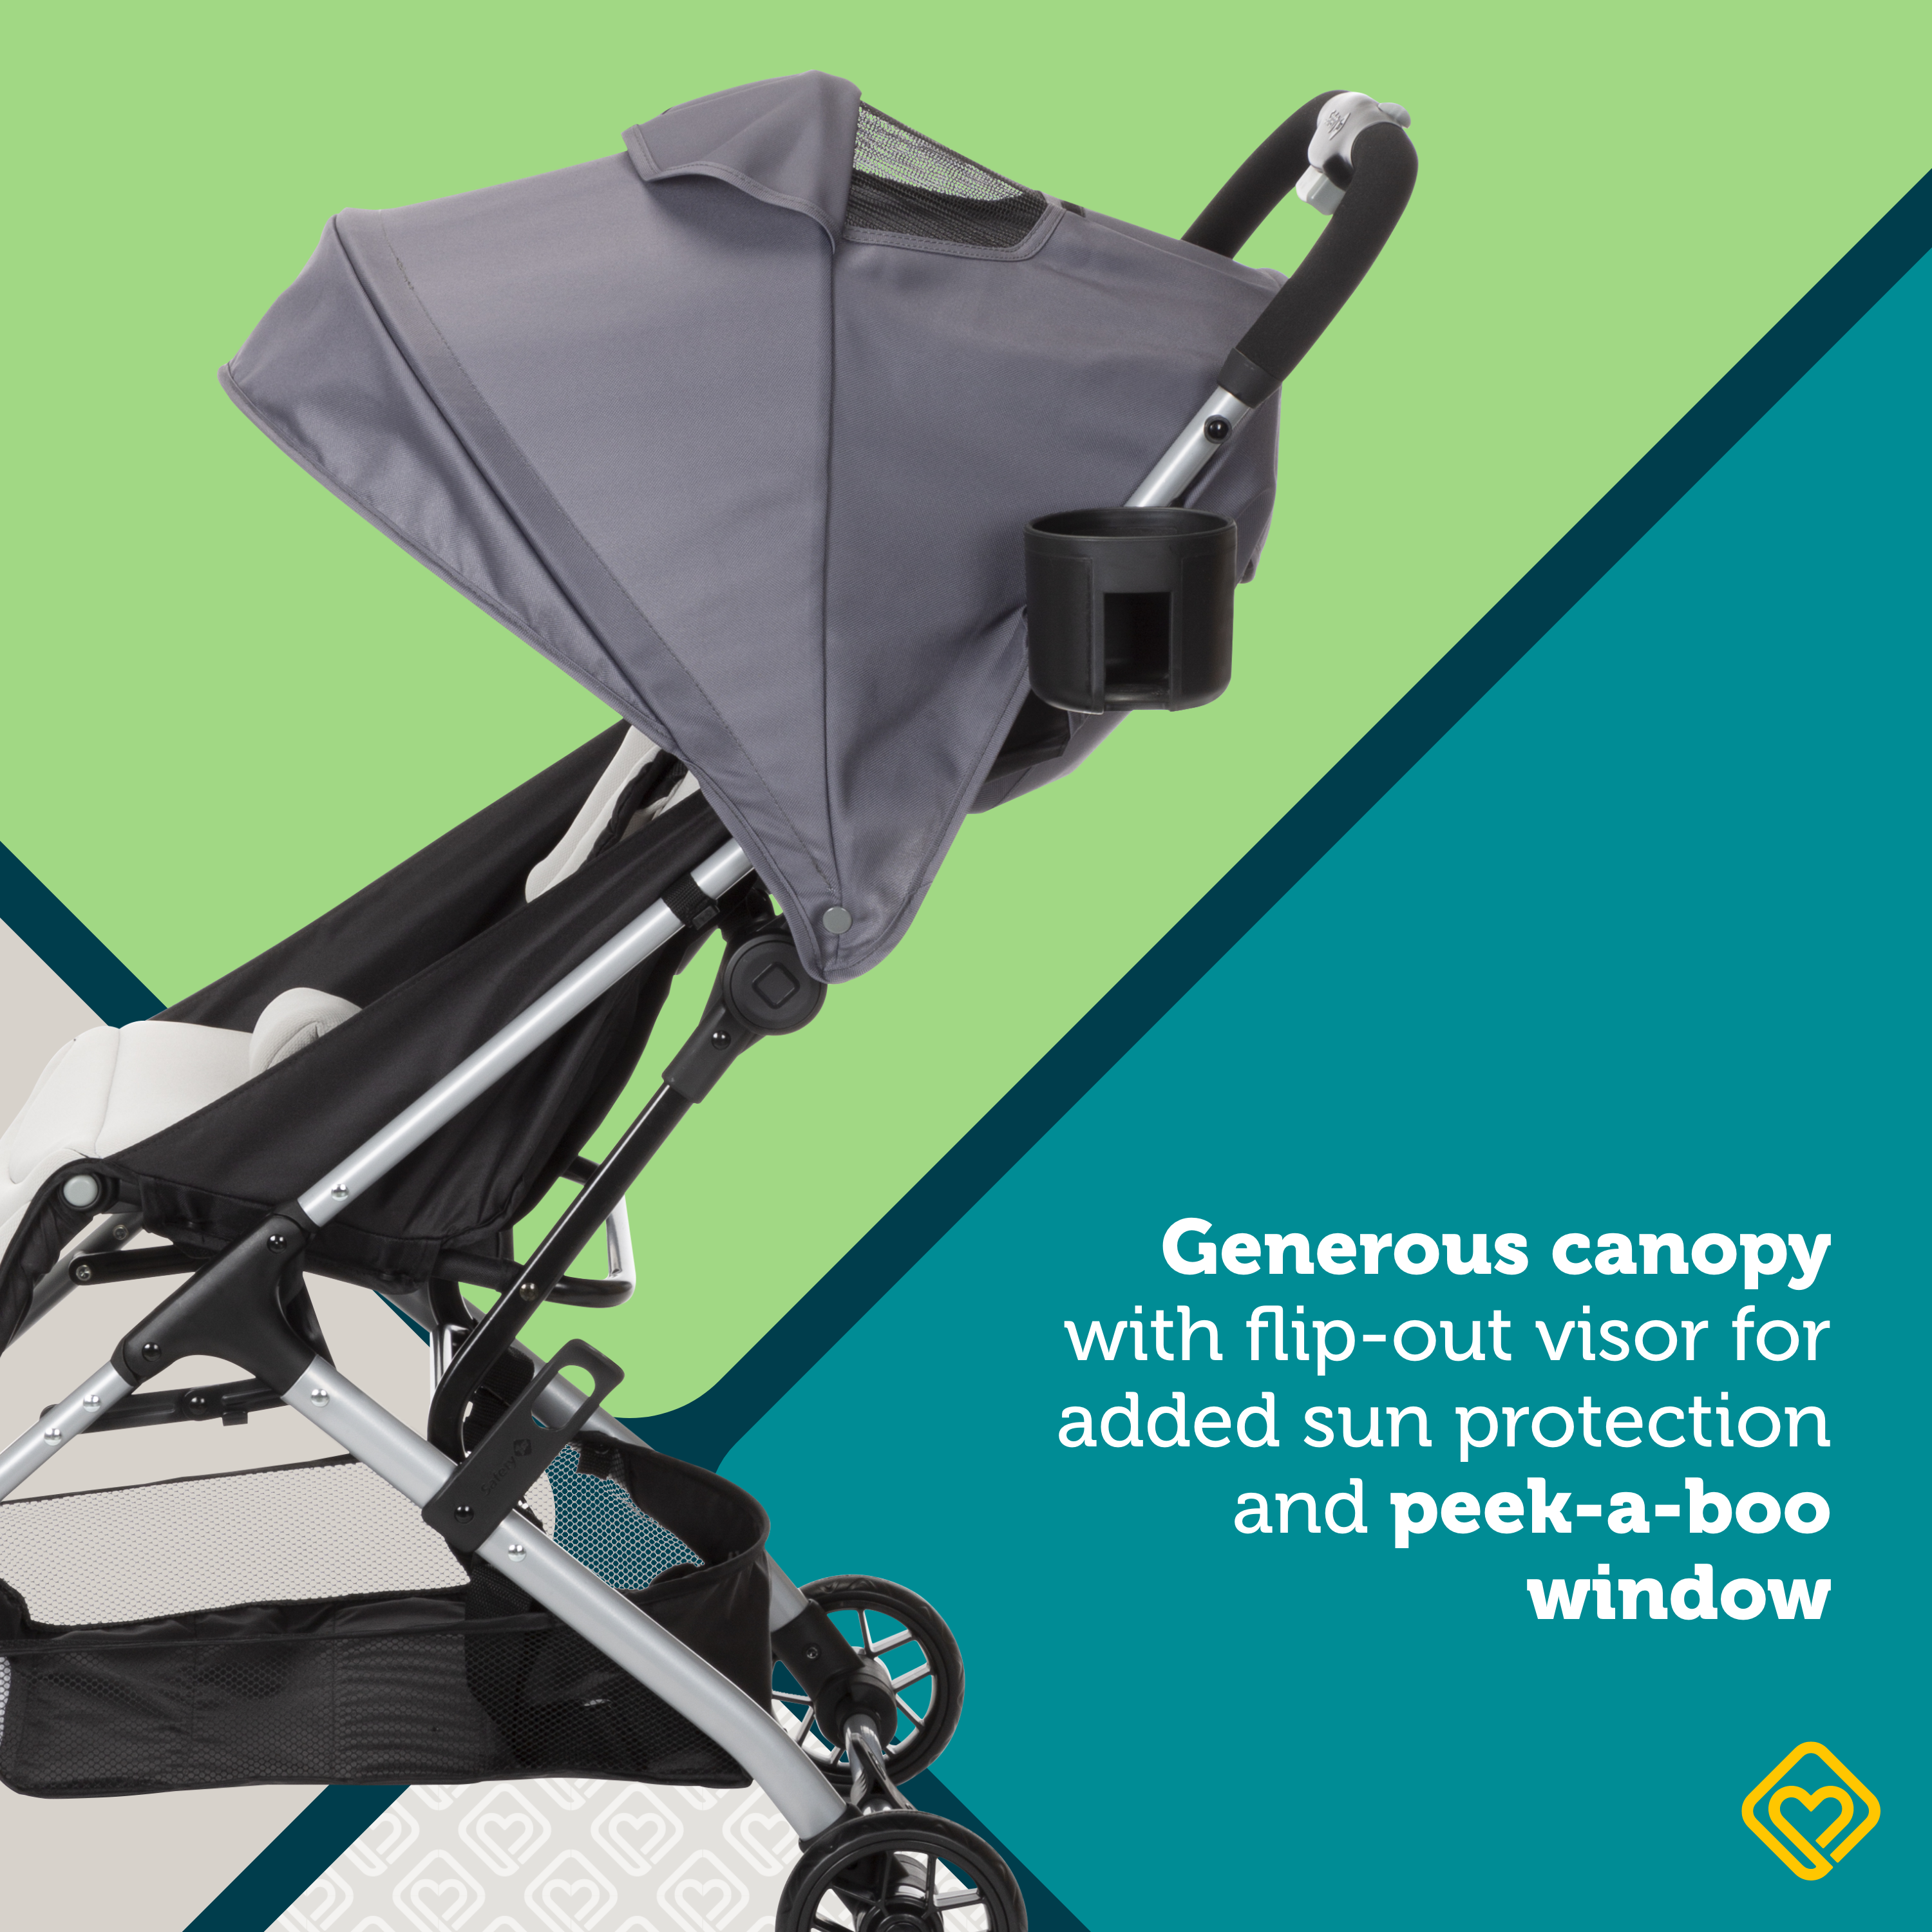 Easy-Fold Compact Stroller - generous canopy with flip-out visor for added sun protection and peek-a-boo window